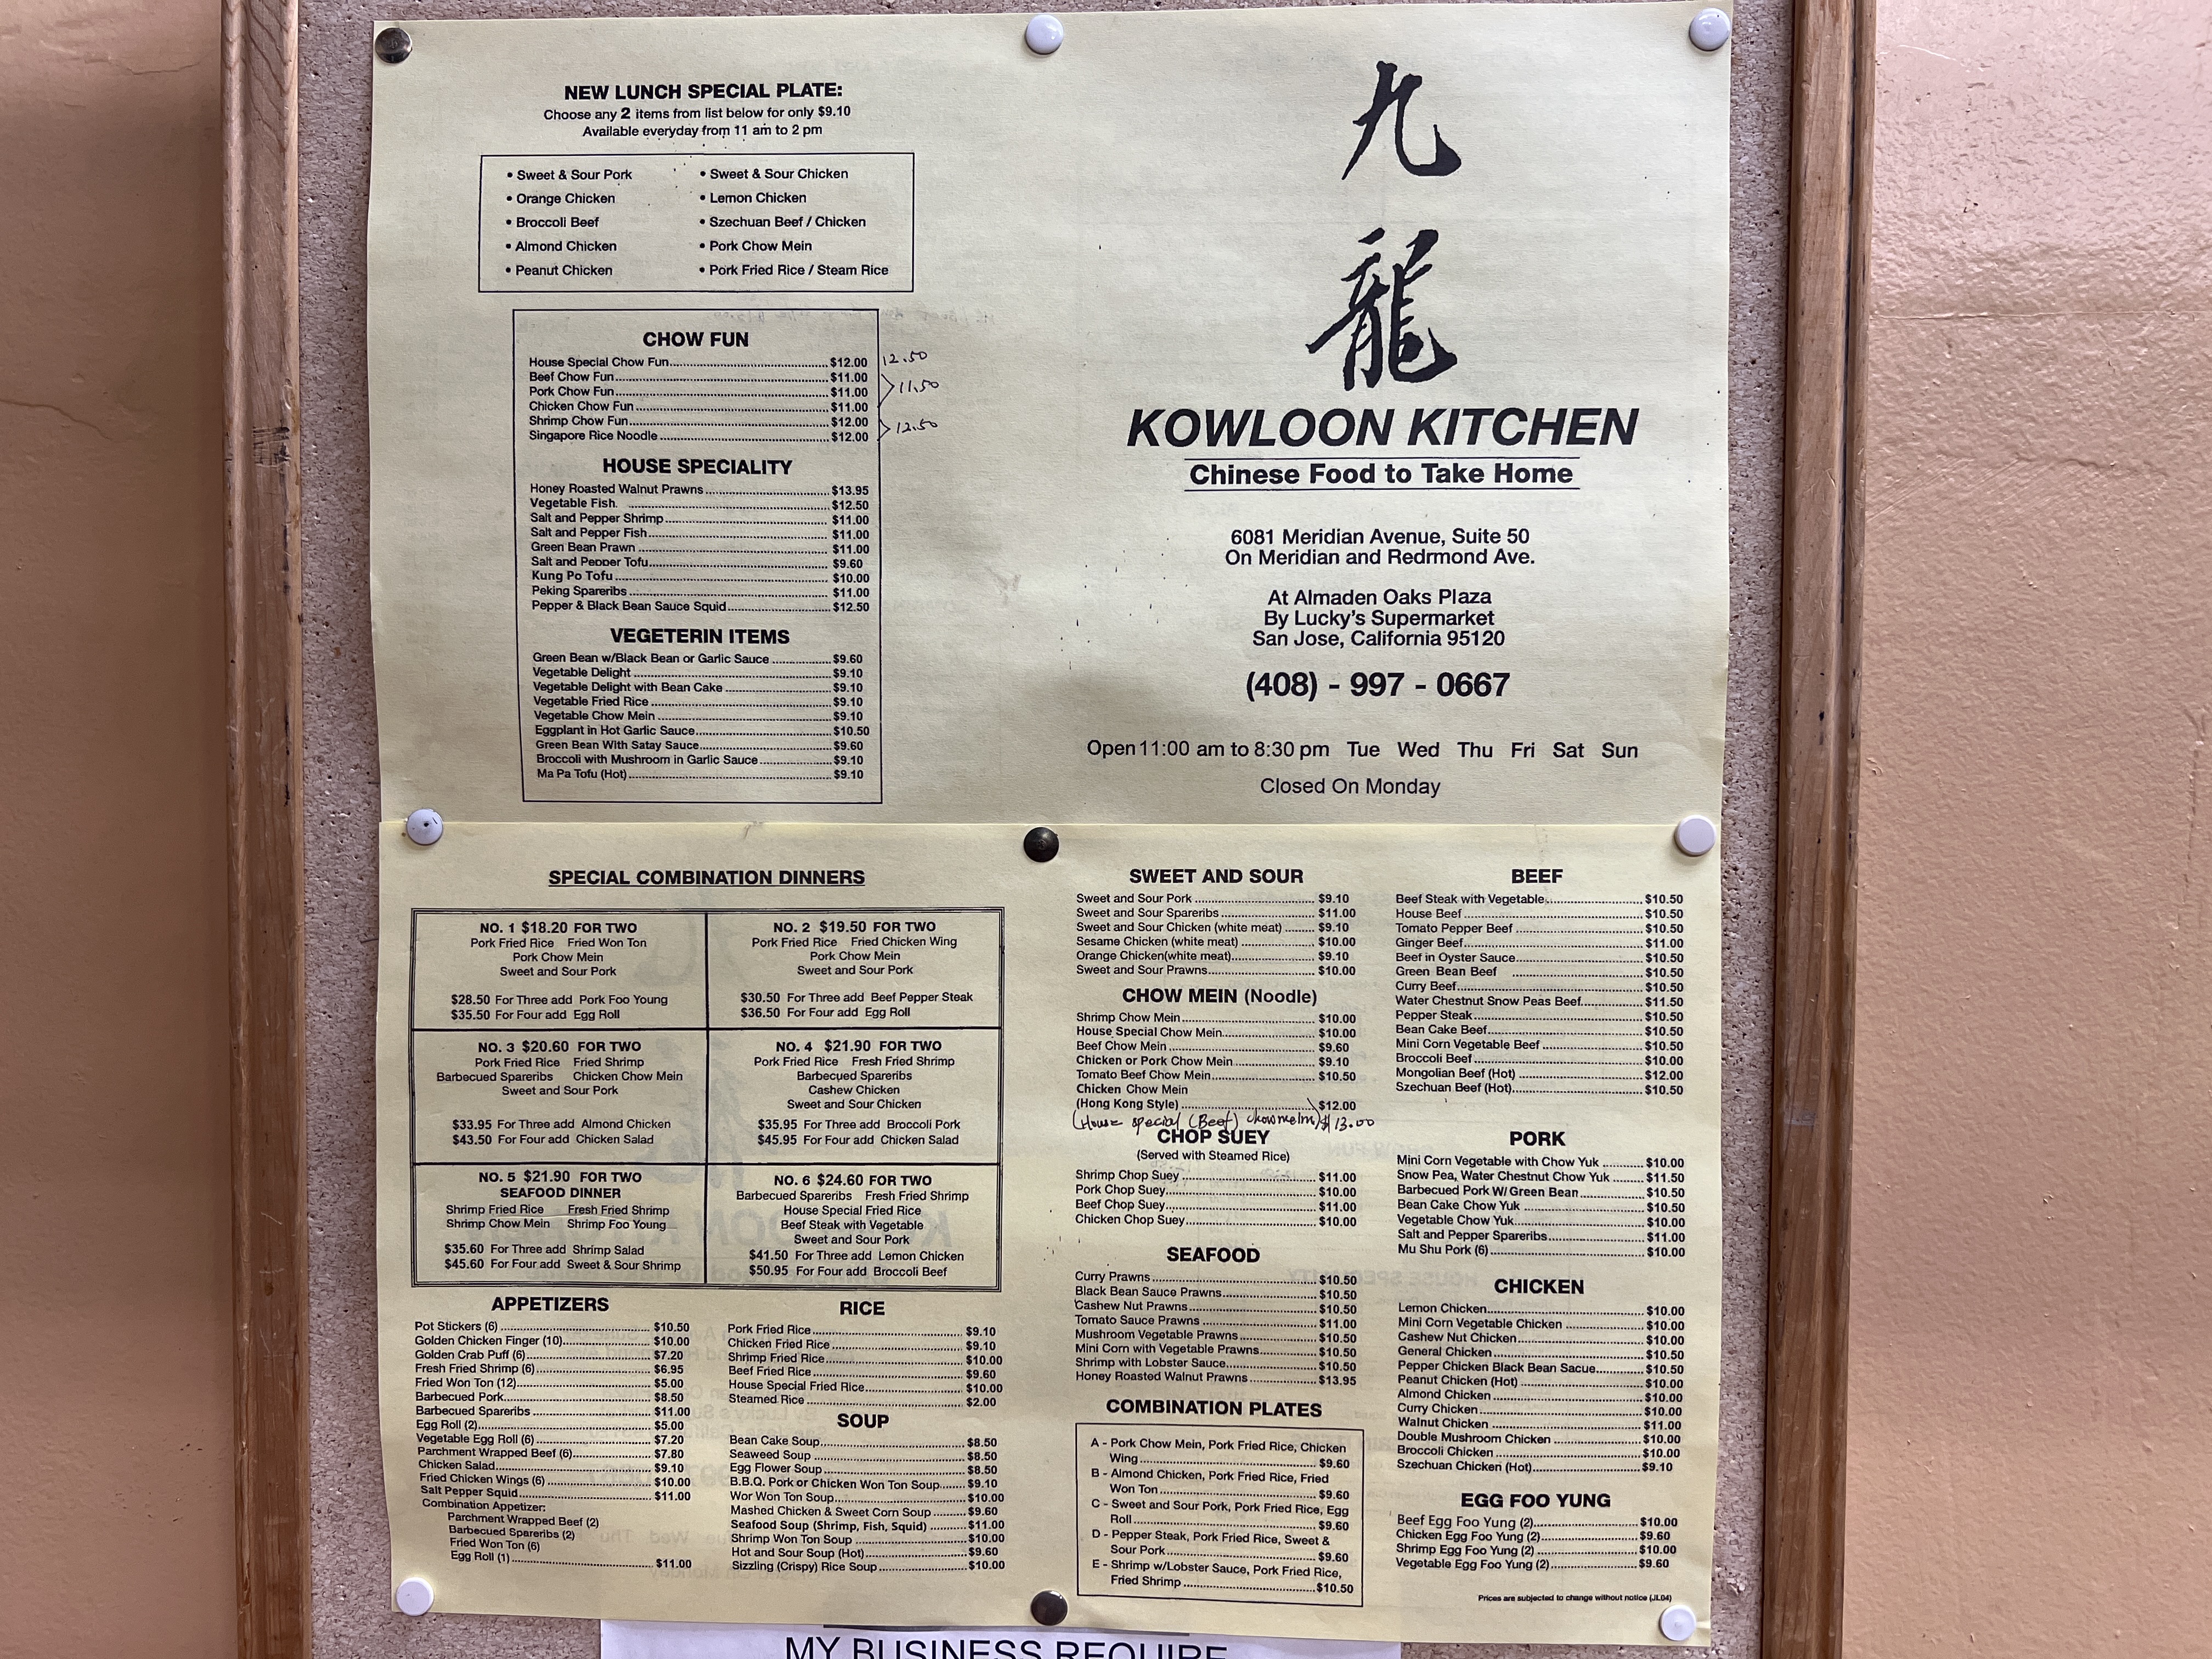 Kowloon Kitchen Take Out 6081 Meridian Ave Suite 70 #142, San Jose, CA 95120